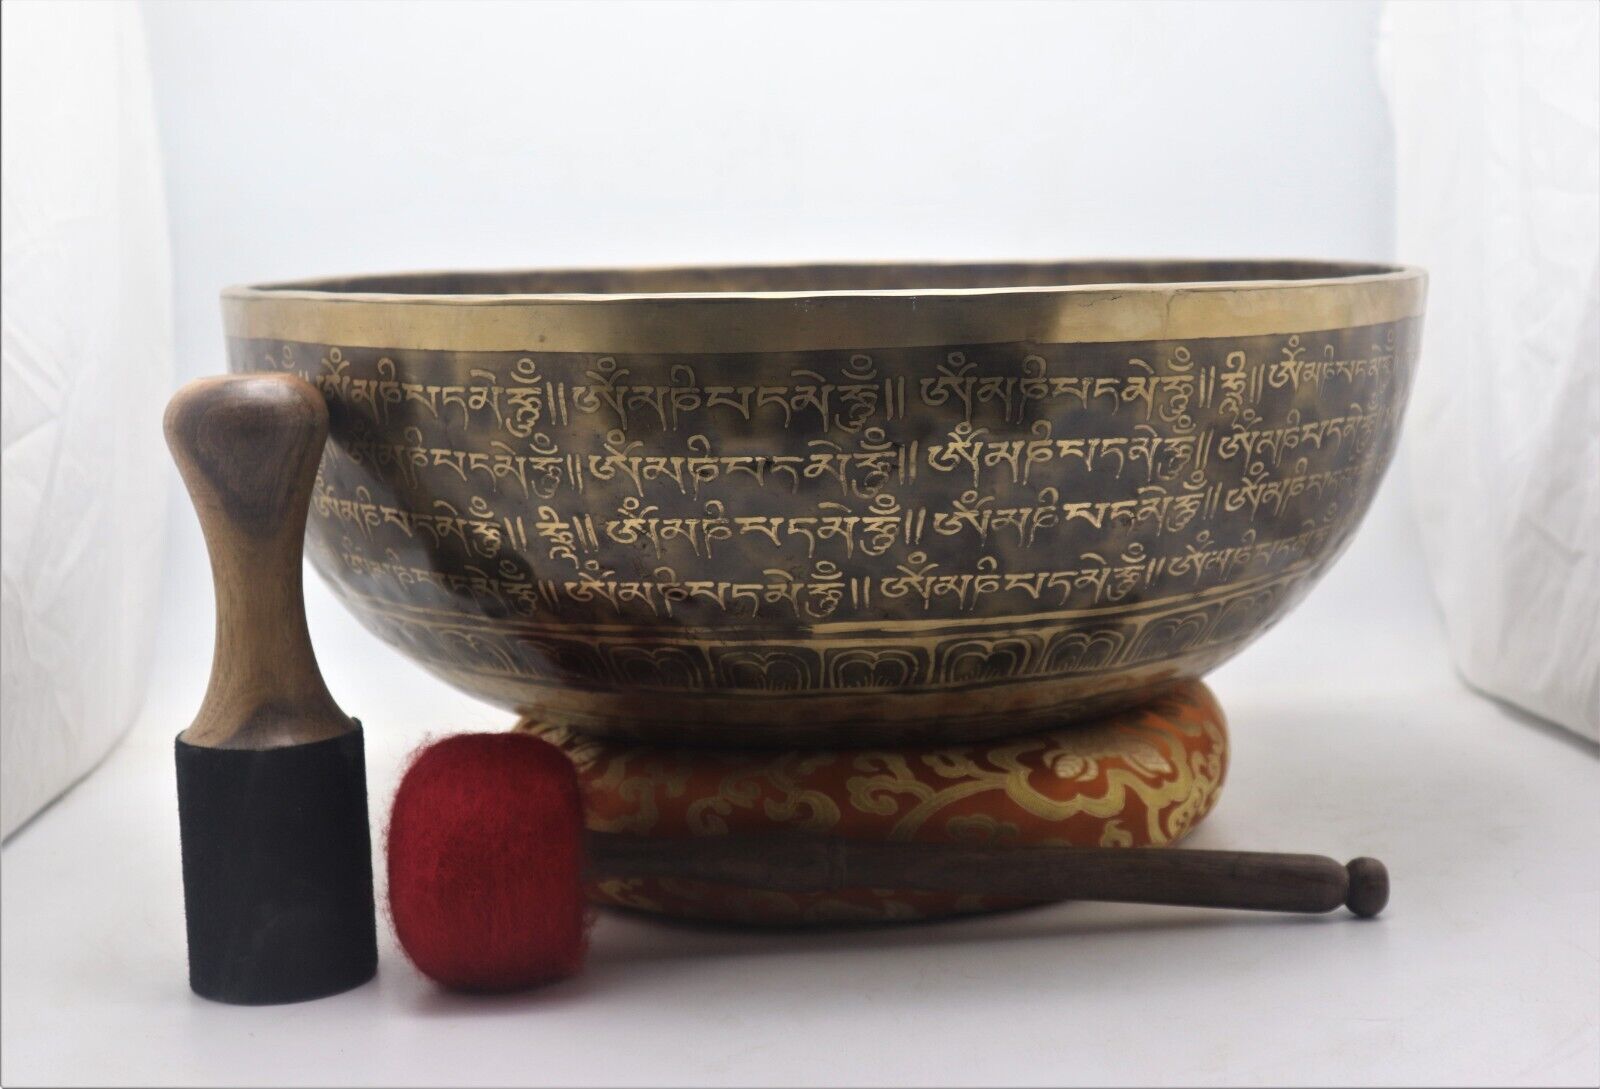 🌟 Exquisite 18-Inch Chakra Singing Bowl with Buddhist Mantras 🌟